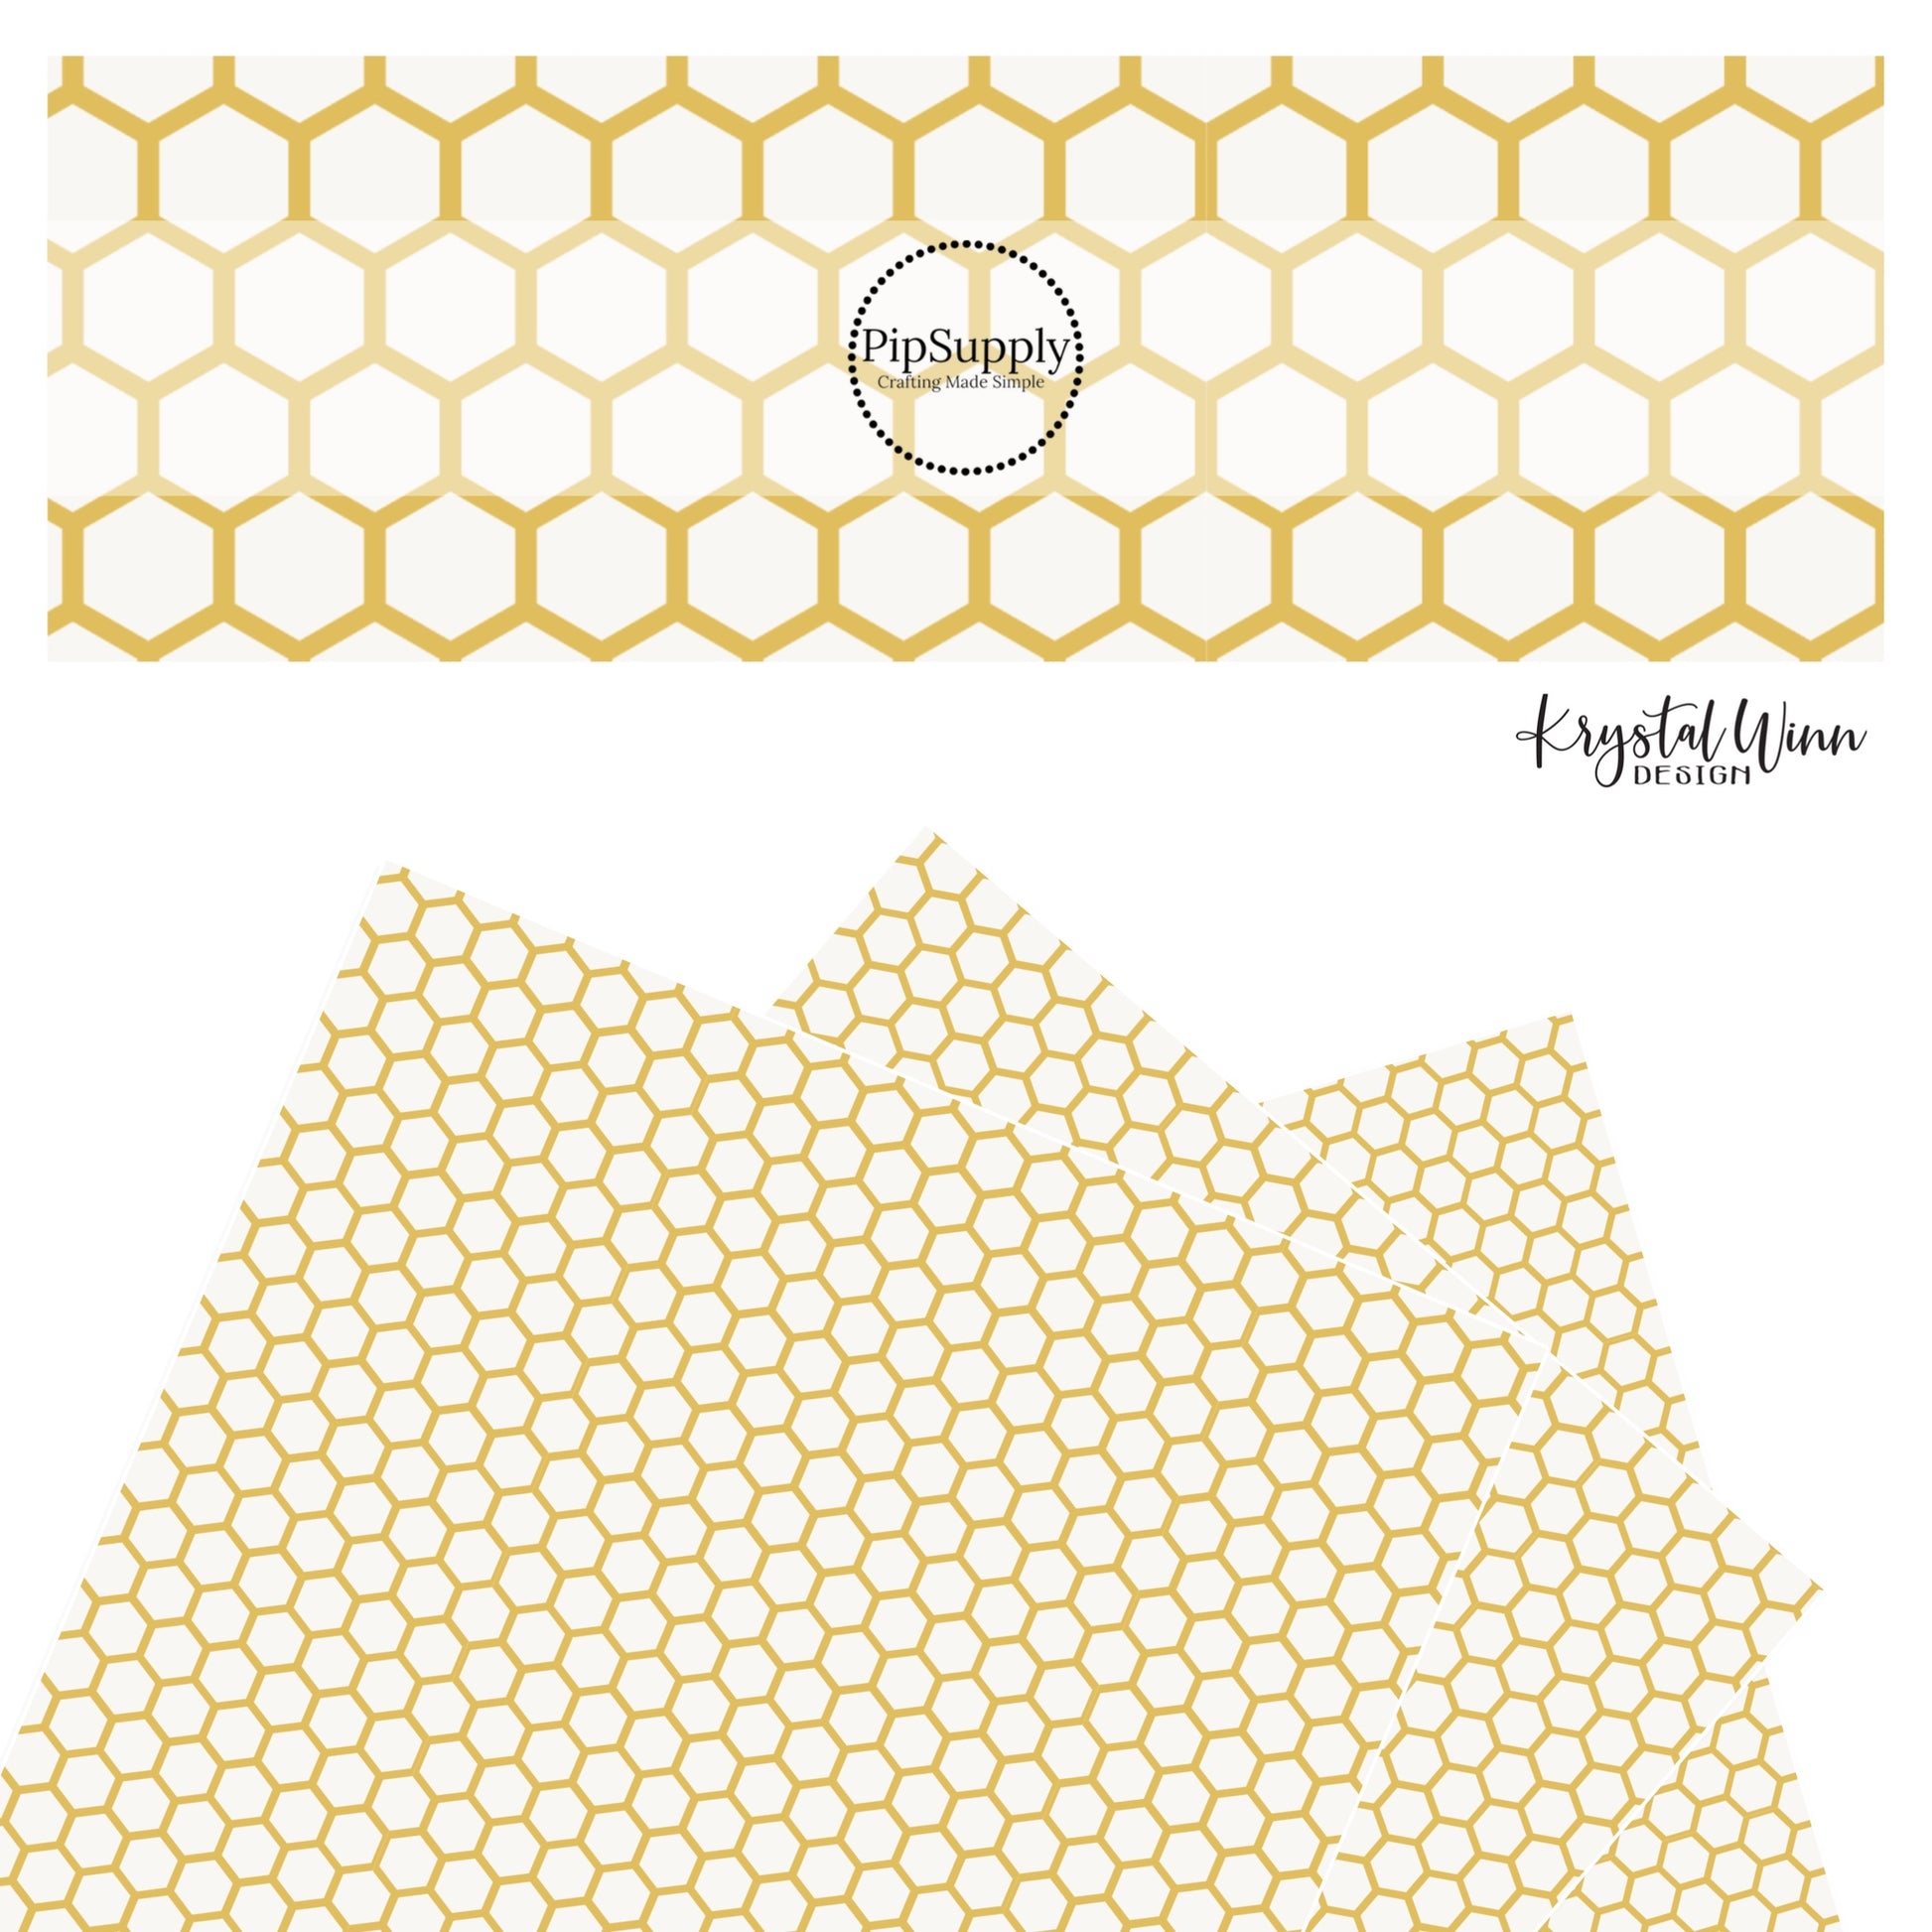 Gold outlined hexagons on a repeating cream faux leather sheet